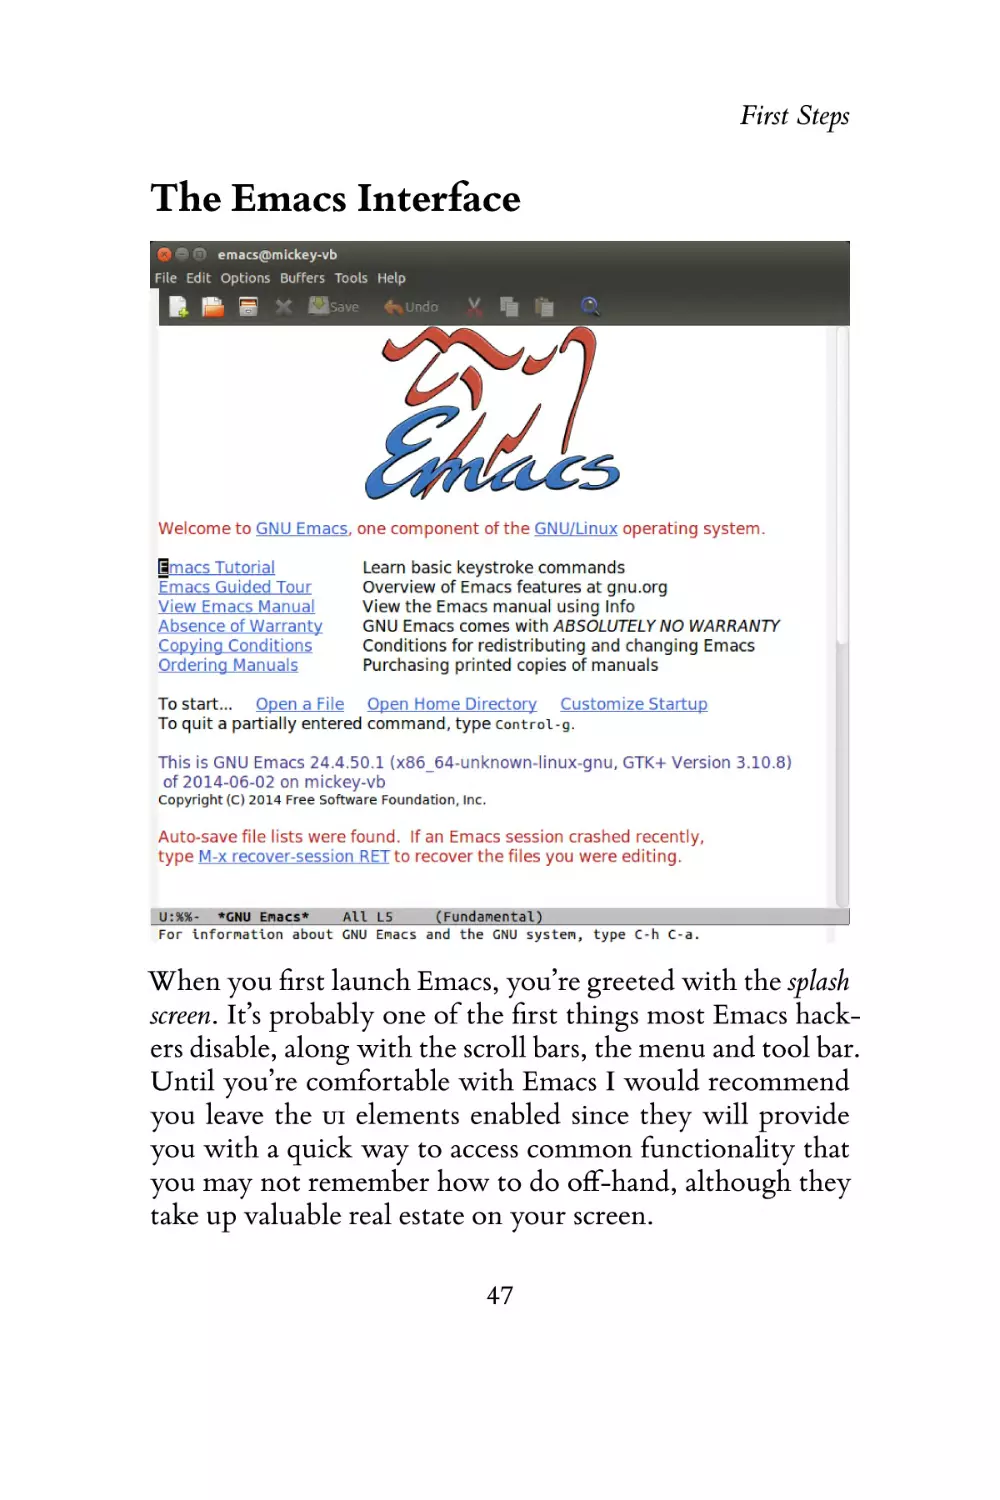 The Emacs Interface